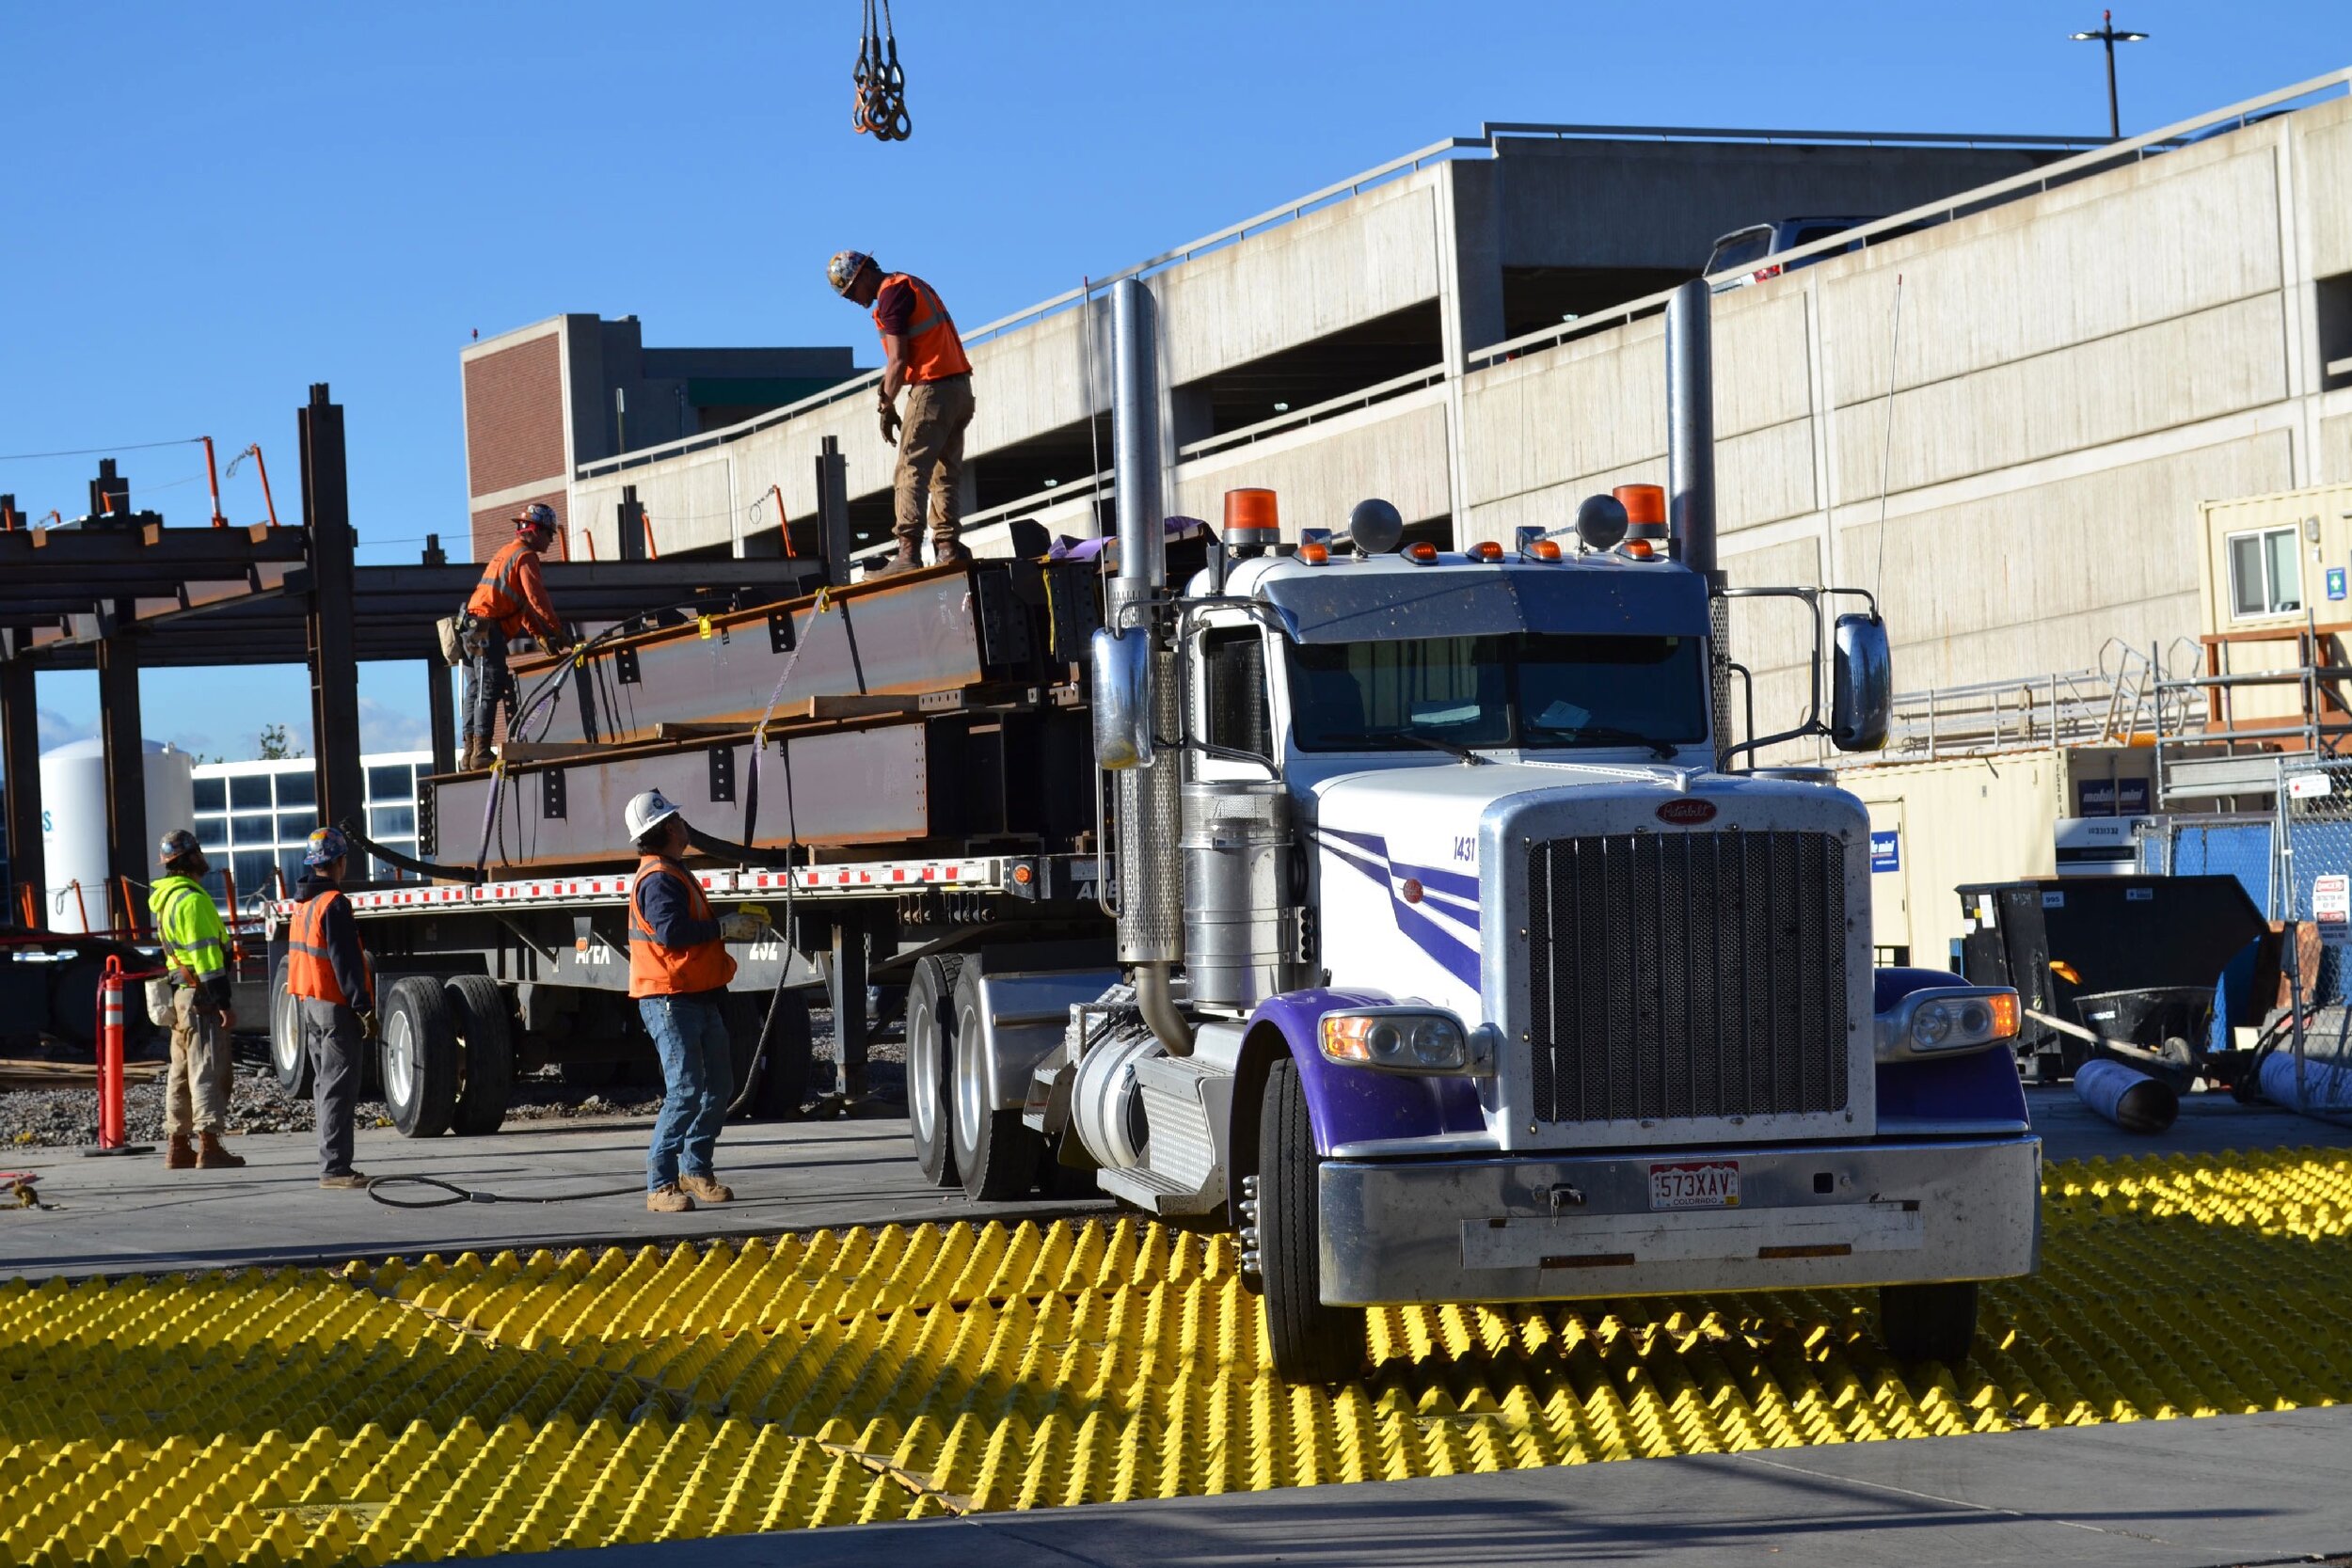 Workers unloading structural steel from delivery truck.